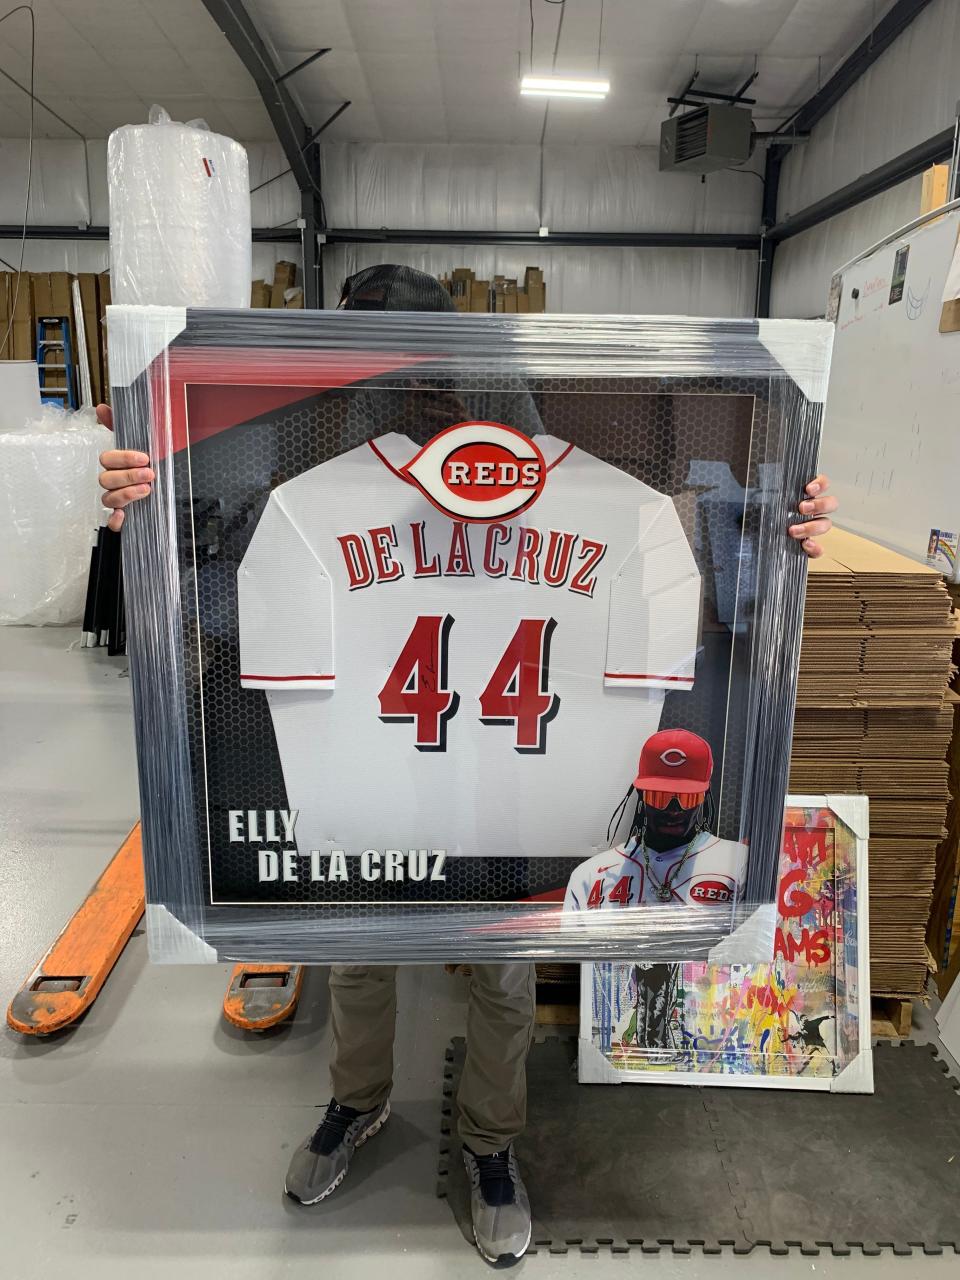 The Reds not only provided a jersey. They provided a jersey signed by the 21-year-old Reds' shortstop, though Elly De La Cruz rarely gives autographs.